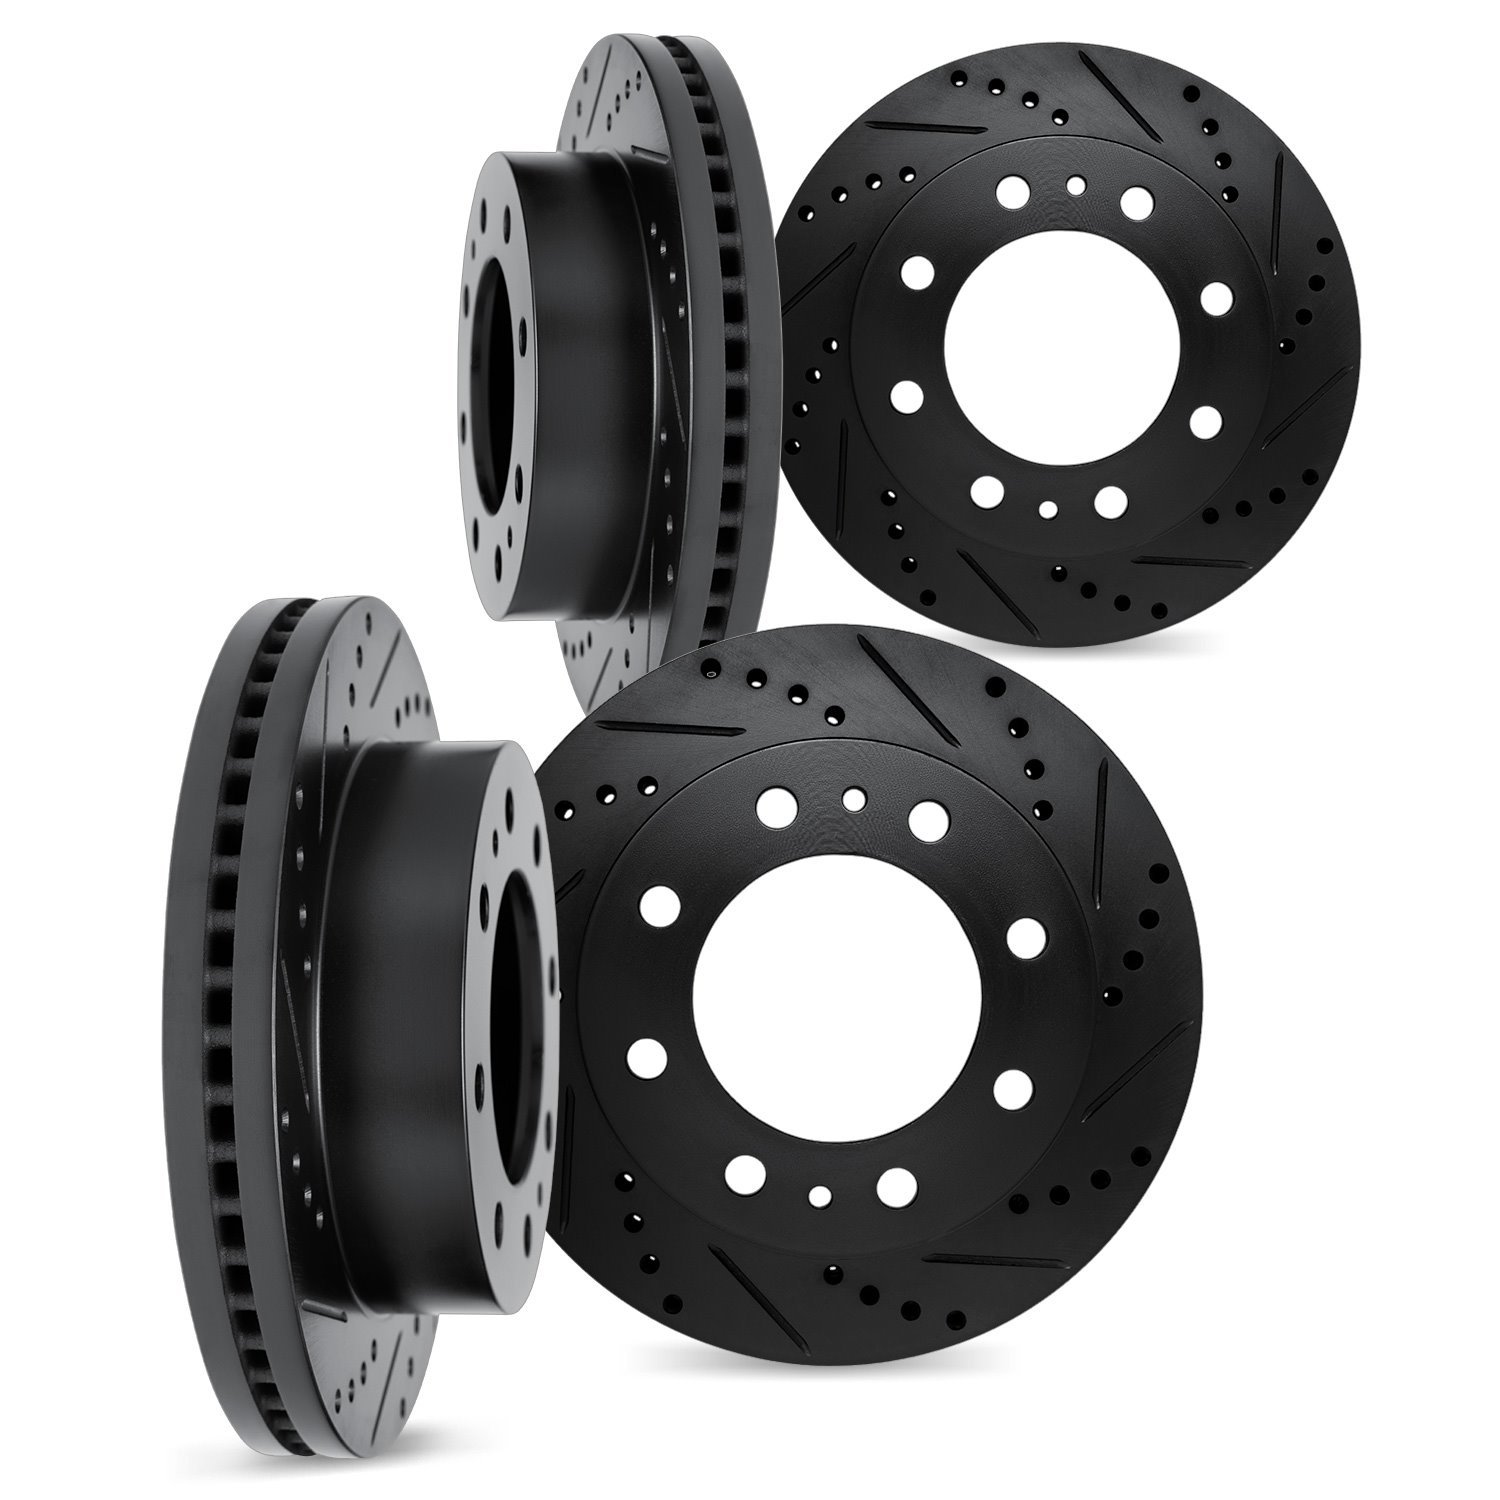 8004-40140 Drilled/Slotted Brake Rotors [Black], Fits Select Mopar, Position: Front and Rear